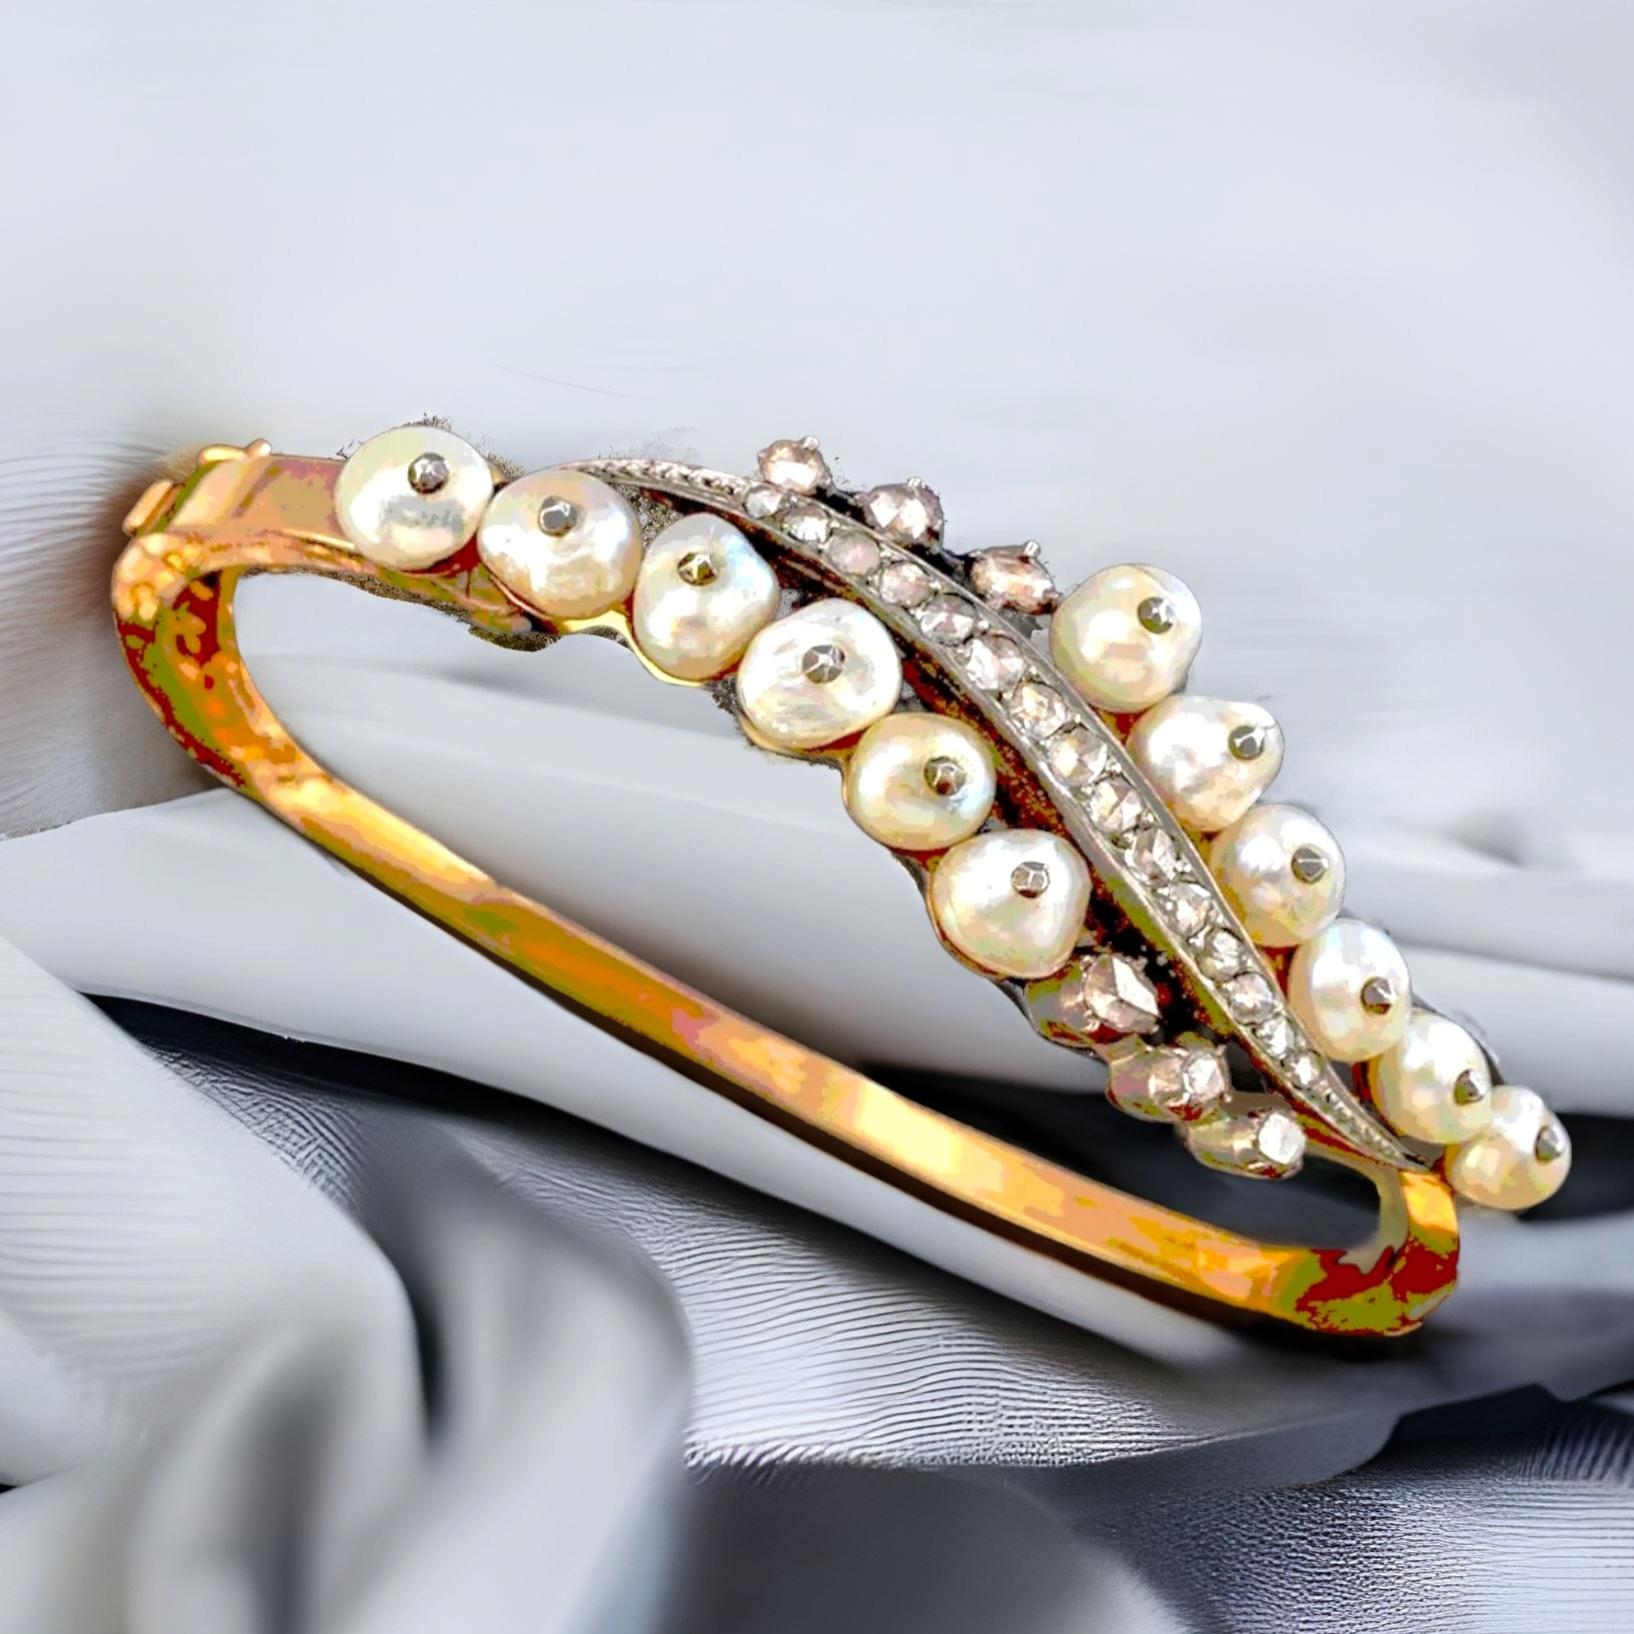 Natural Pearl and Diamond Bangle Bracelet, Georgian Period 1714-1837.
The term ‘Georgian’ refers to the English art and culture produced during this era. However, despite the name of the period referencing the English monarchy, historical events in